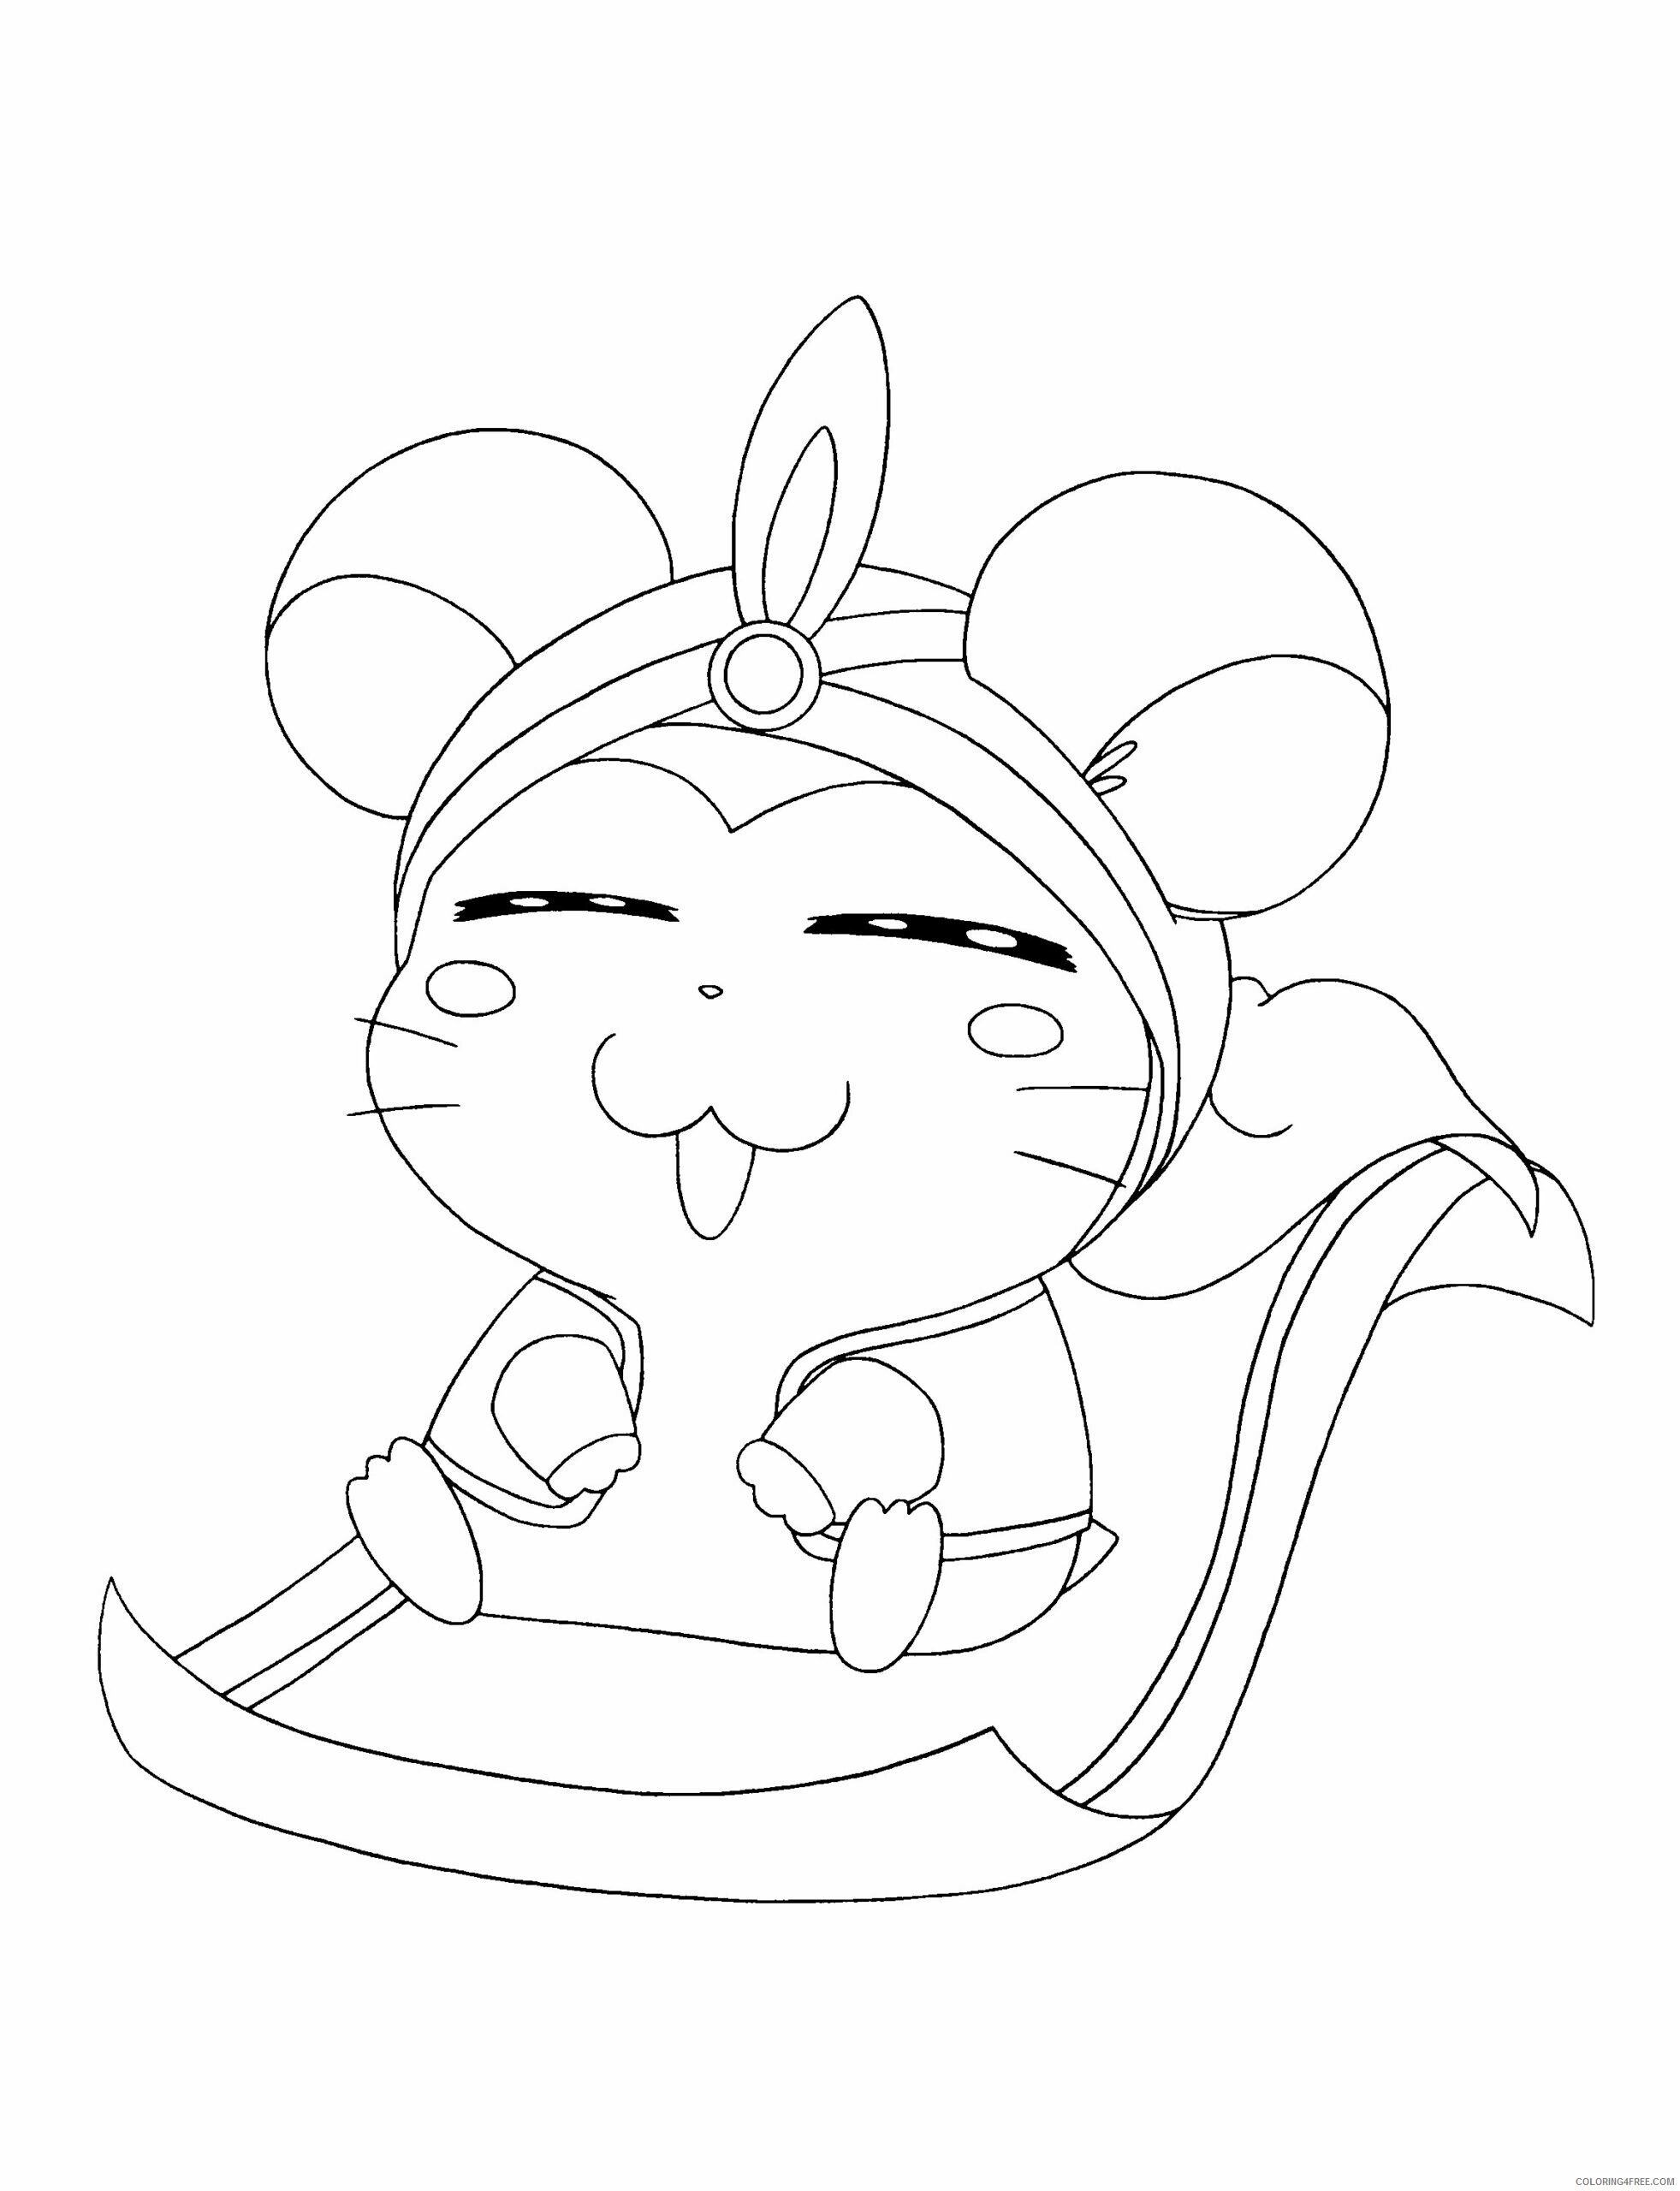 Hamtaro Printable Coloring Pages Anime hamtaro Vr4zz 2021 0561 Coloring4free